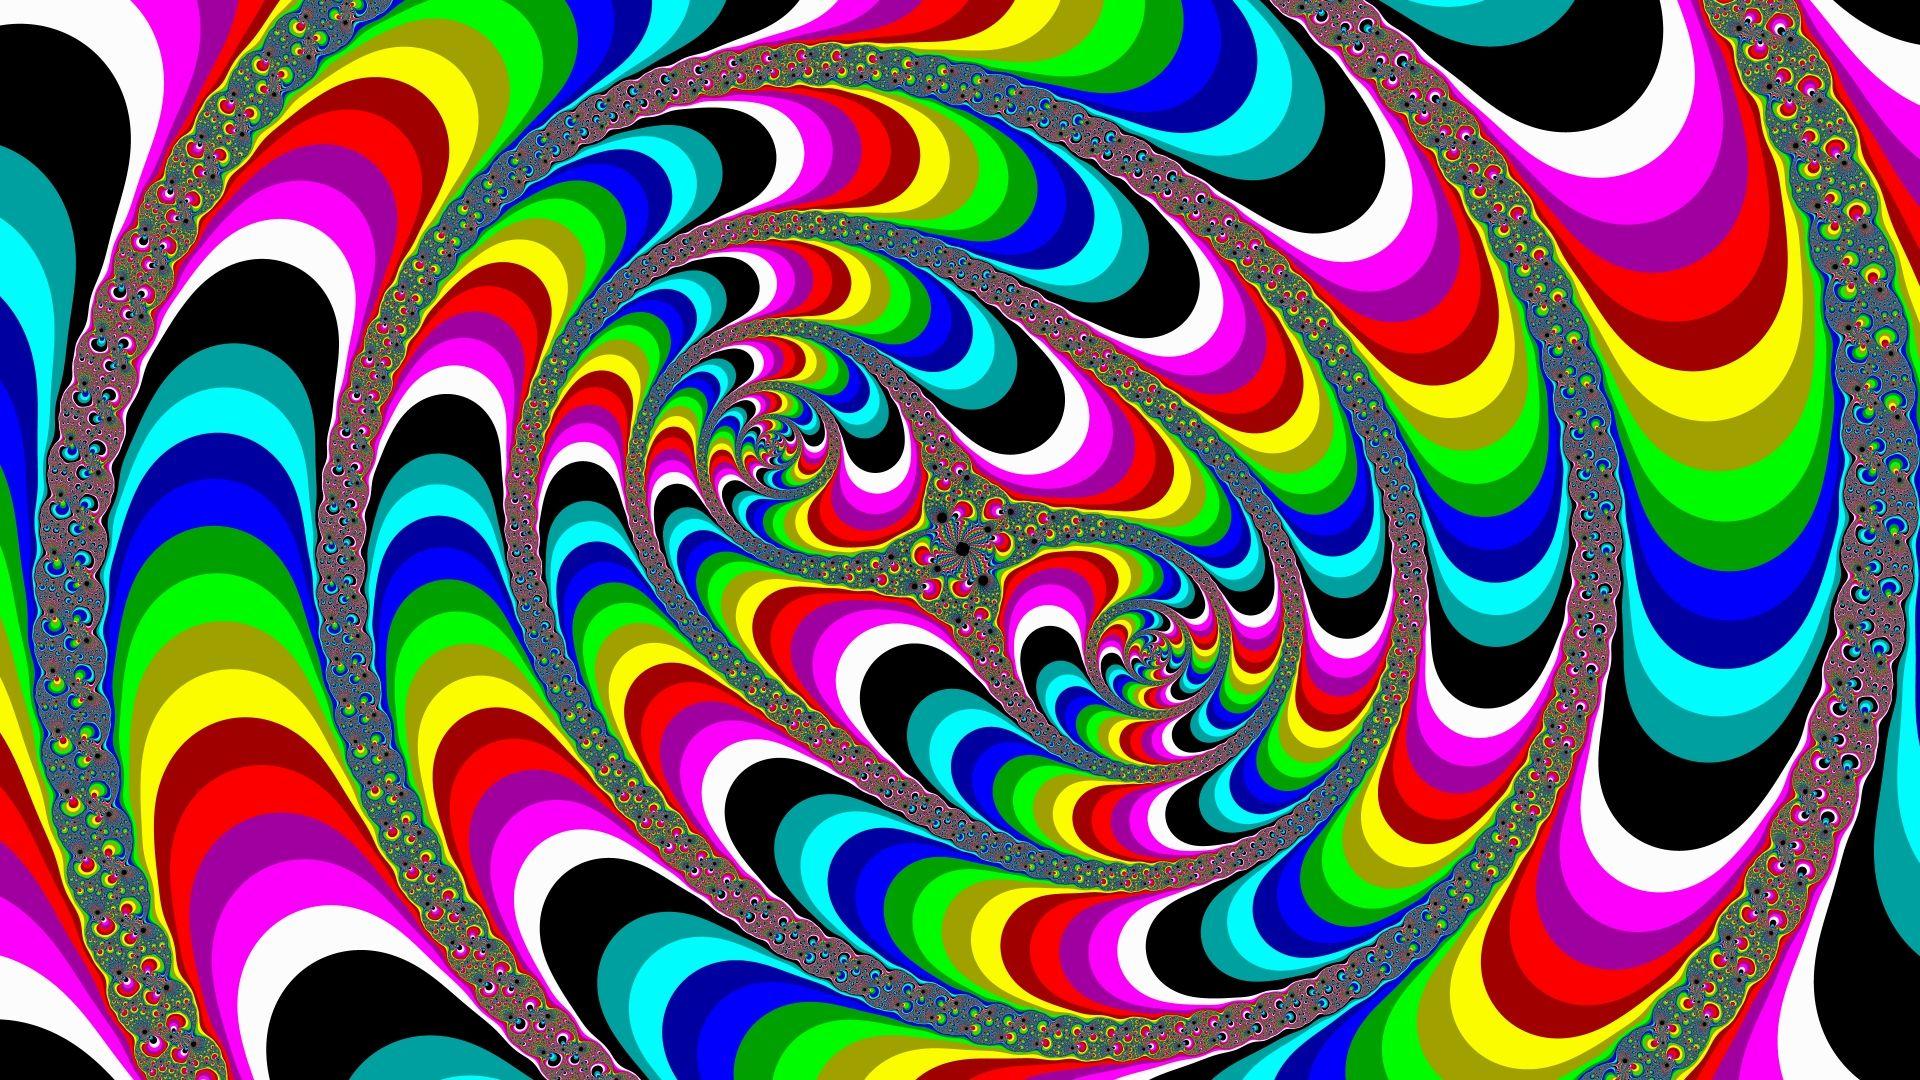 Psychedelic Wallpapers HD 1920x1080 - Wallpaper Cave